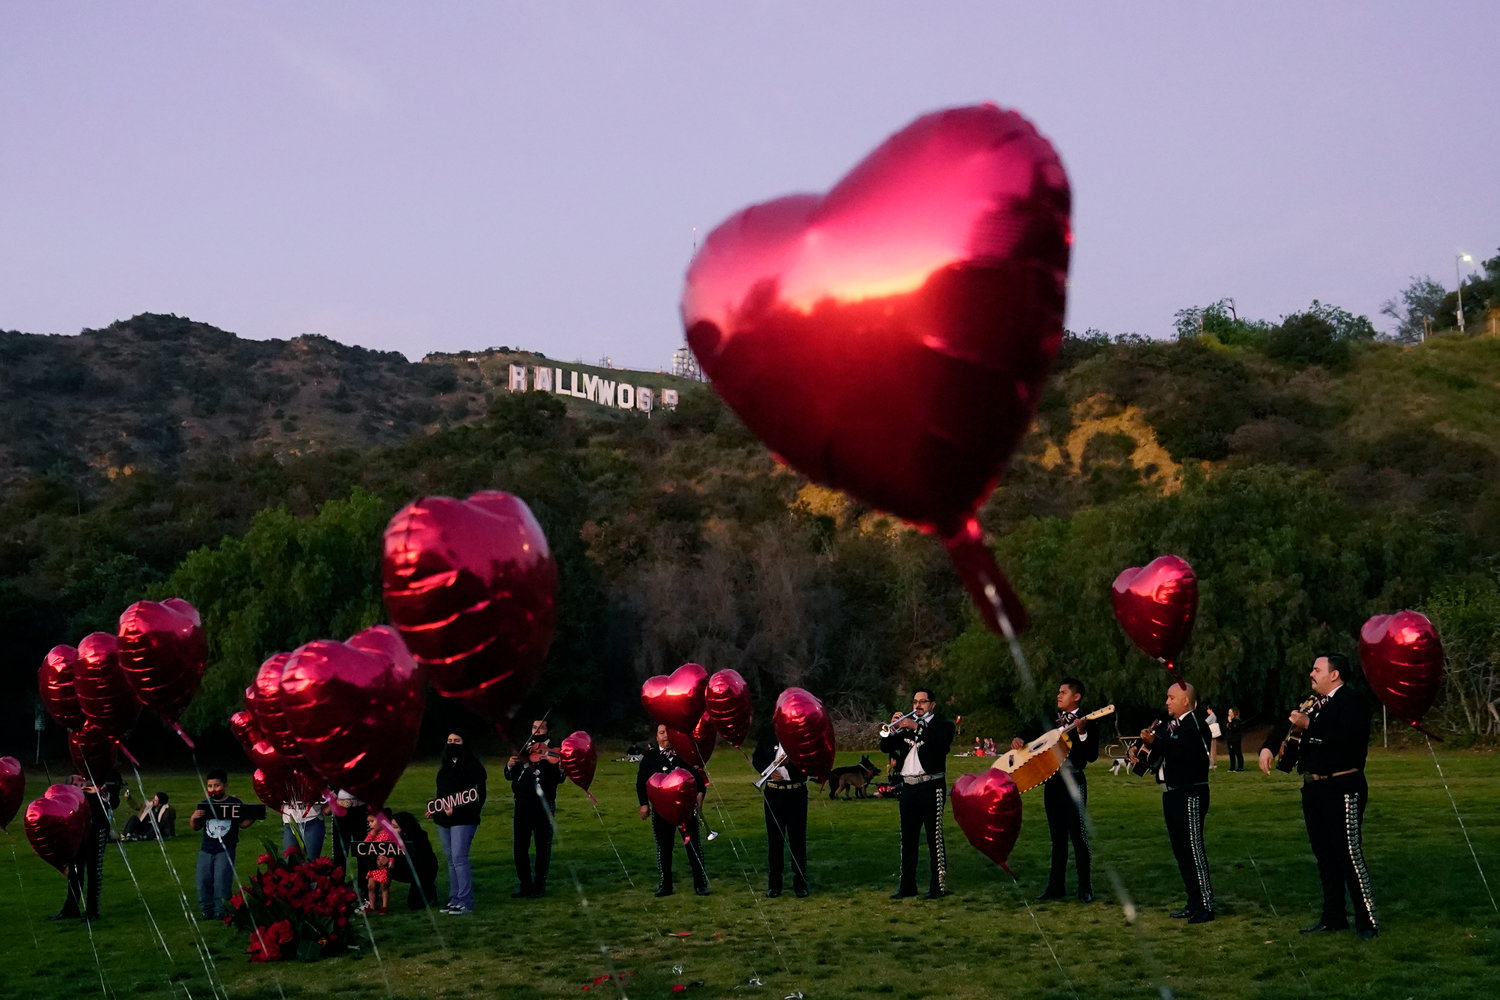 FILE - A Mexican Mariachi band surrounded by heart-shaped balloons awaits the arrival of a couple's wedding proposal ceremony at the Lake Hollywood Park in Los Angeles, on Valentine's Day, Monday, Feb. 14, 2022. Attending weddings can be expensive, between travel and lodging, gifts and extra events like bachelor and bachelorette parties. So plan ahead for these expenses, particularly as wedding season approaches and celebrations that were postponed or rescheduled reappear on your calendar.   (AP Photo/Damian Dovarganes, File)